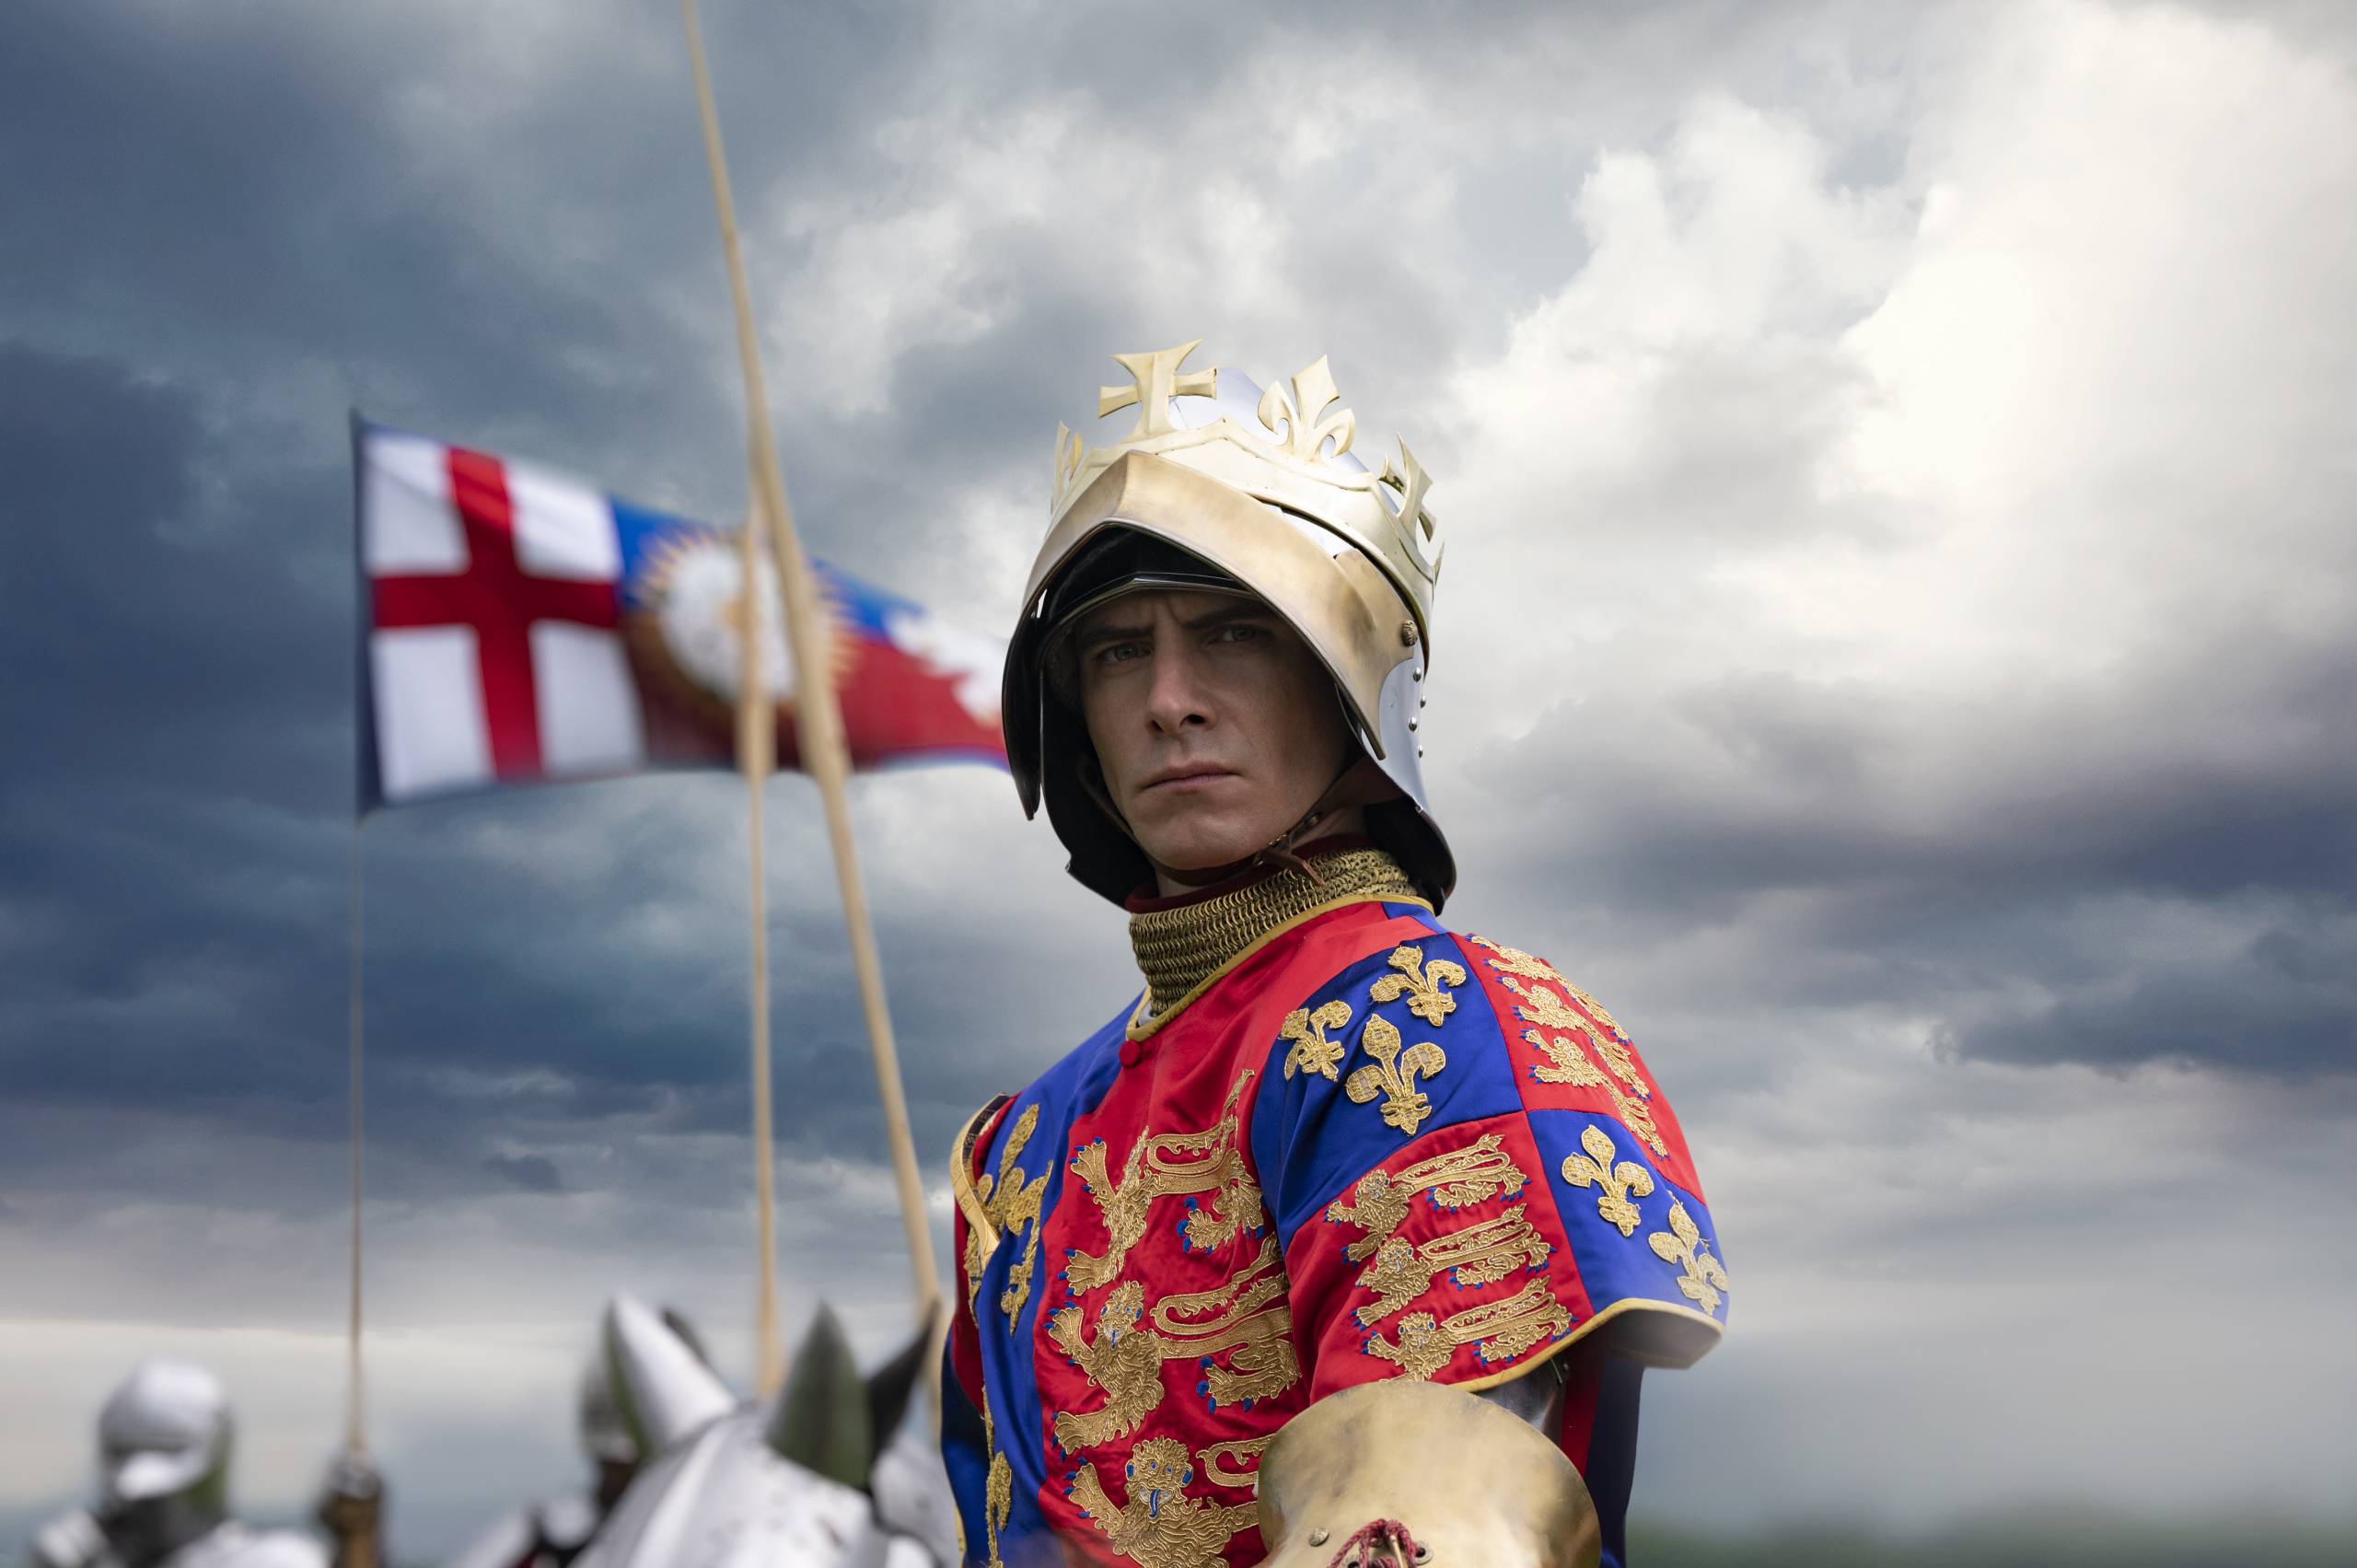 A white man in a helmet and red and blue regalia sits on an armored horse